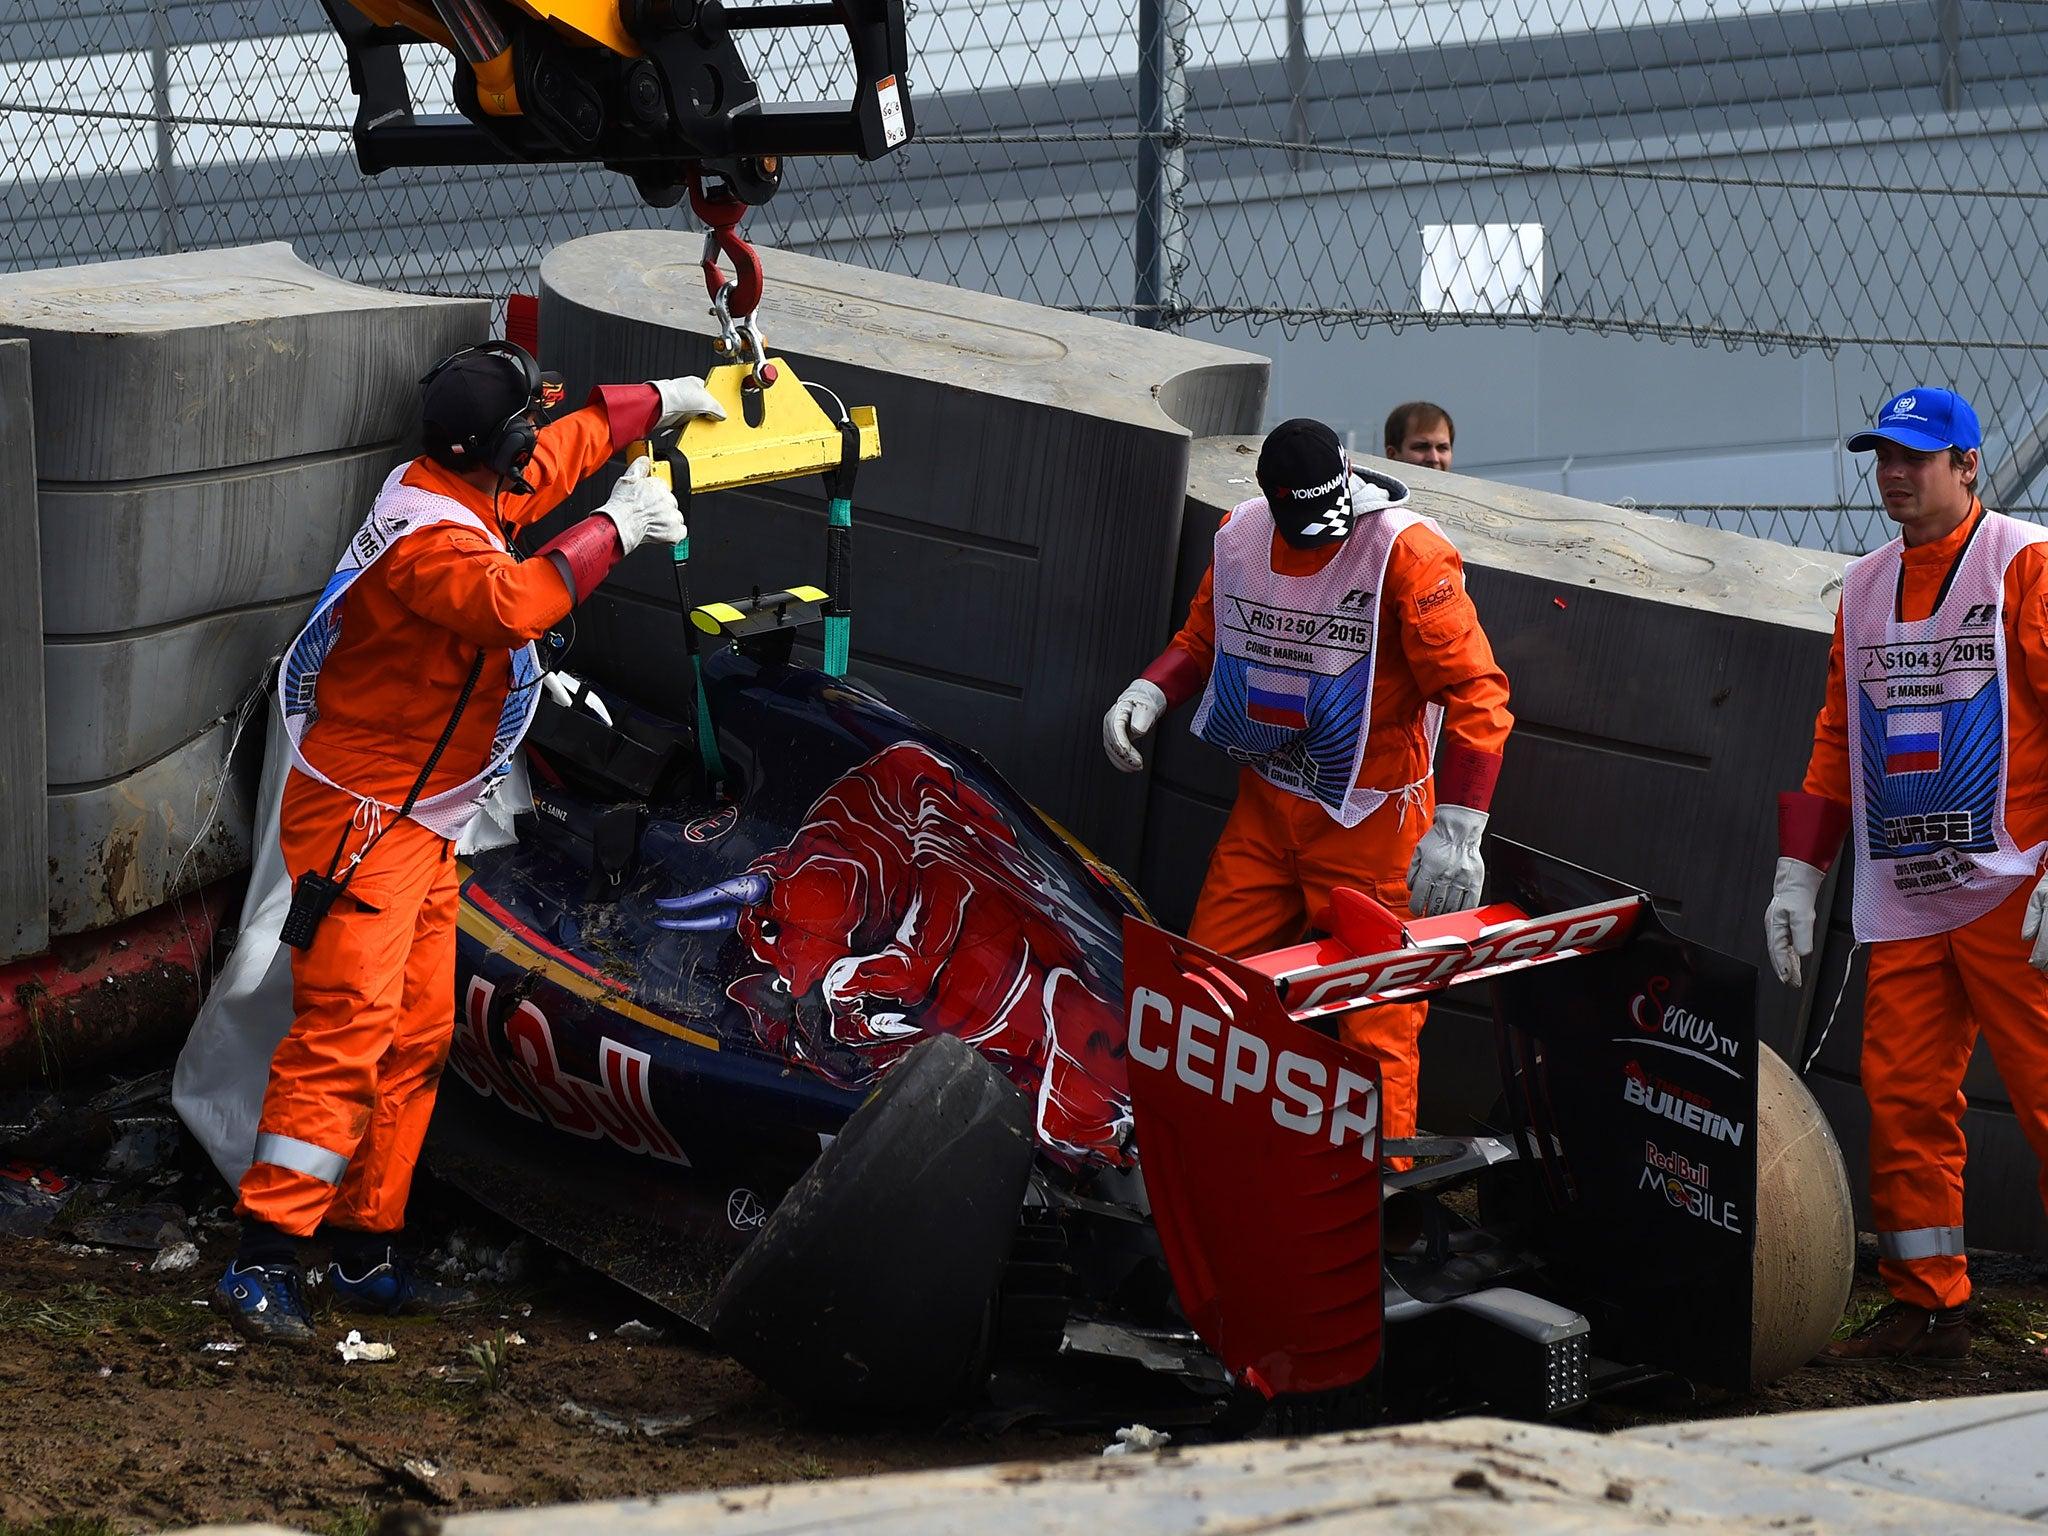 Carlos Sainz crash video: Toro Rosso driver airlifted to hospital